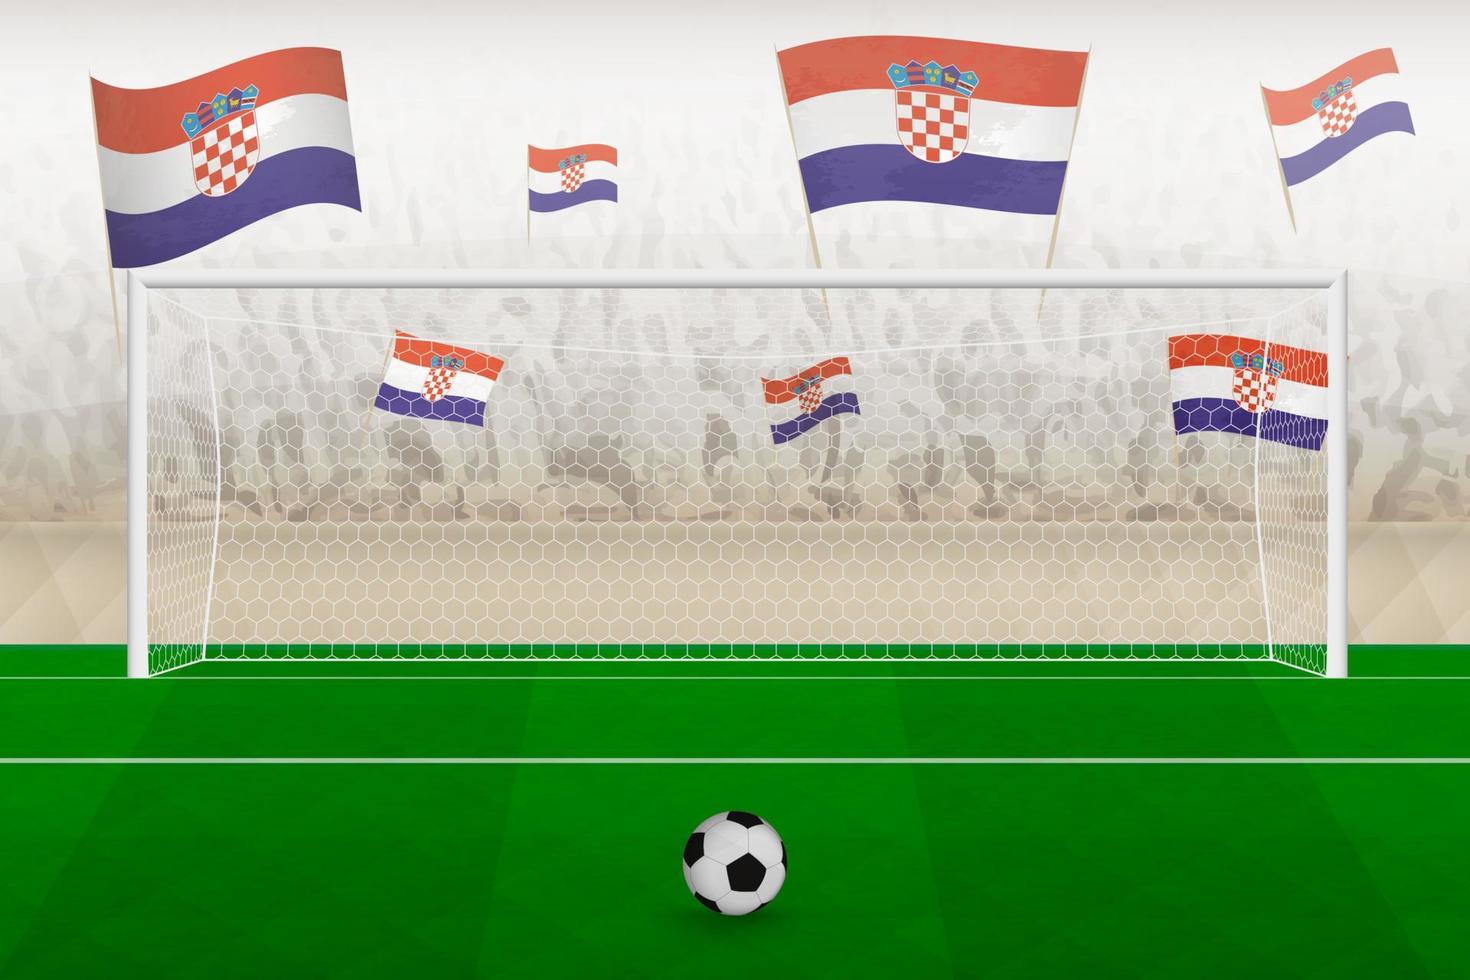 Croatia football team fans with flags of Croatia cheering on stadium, penalty kick concept in a soccer match. vector